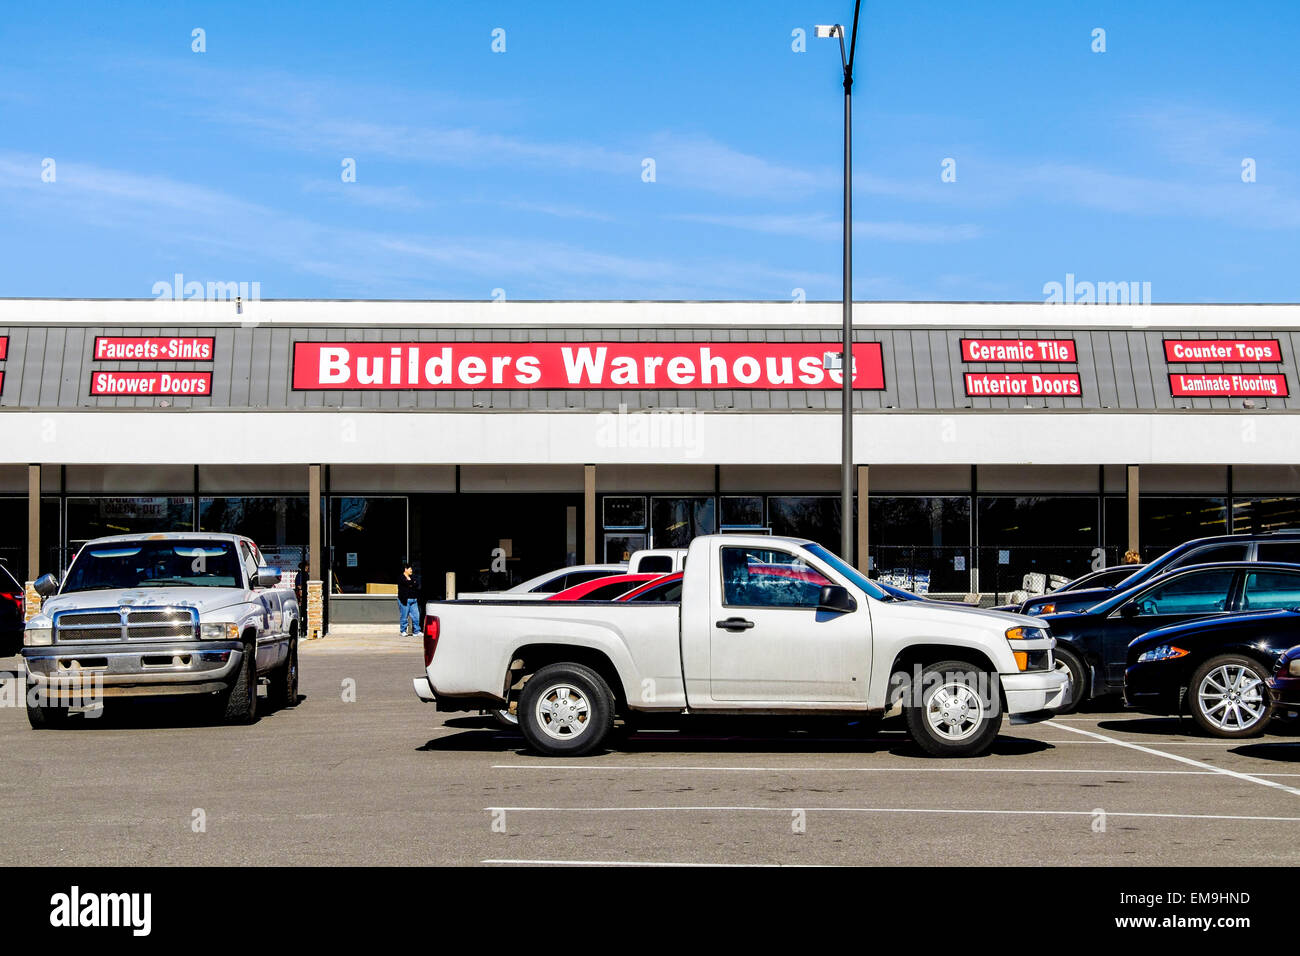 The Storefront Of Builders Warehouse A Business Selling Building Products At Discounted Prices In Oklahoma City Oklahoma Usa Stock Photo Alamy